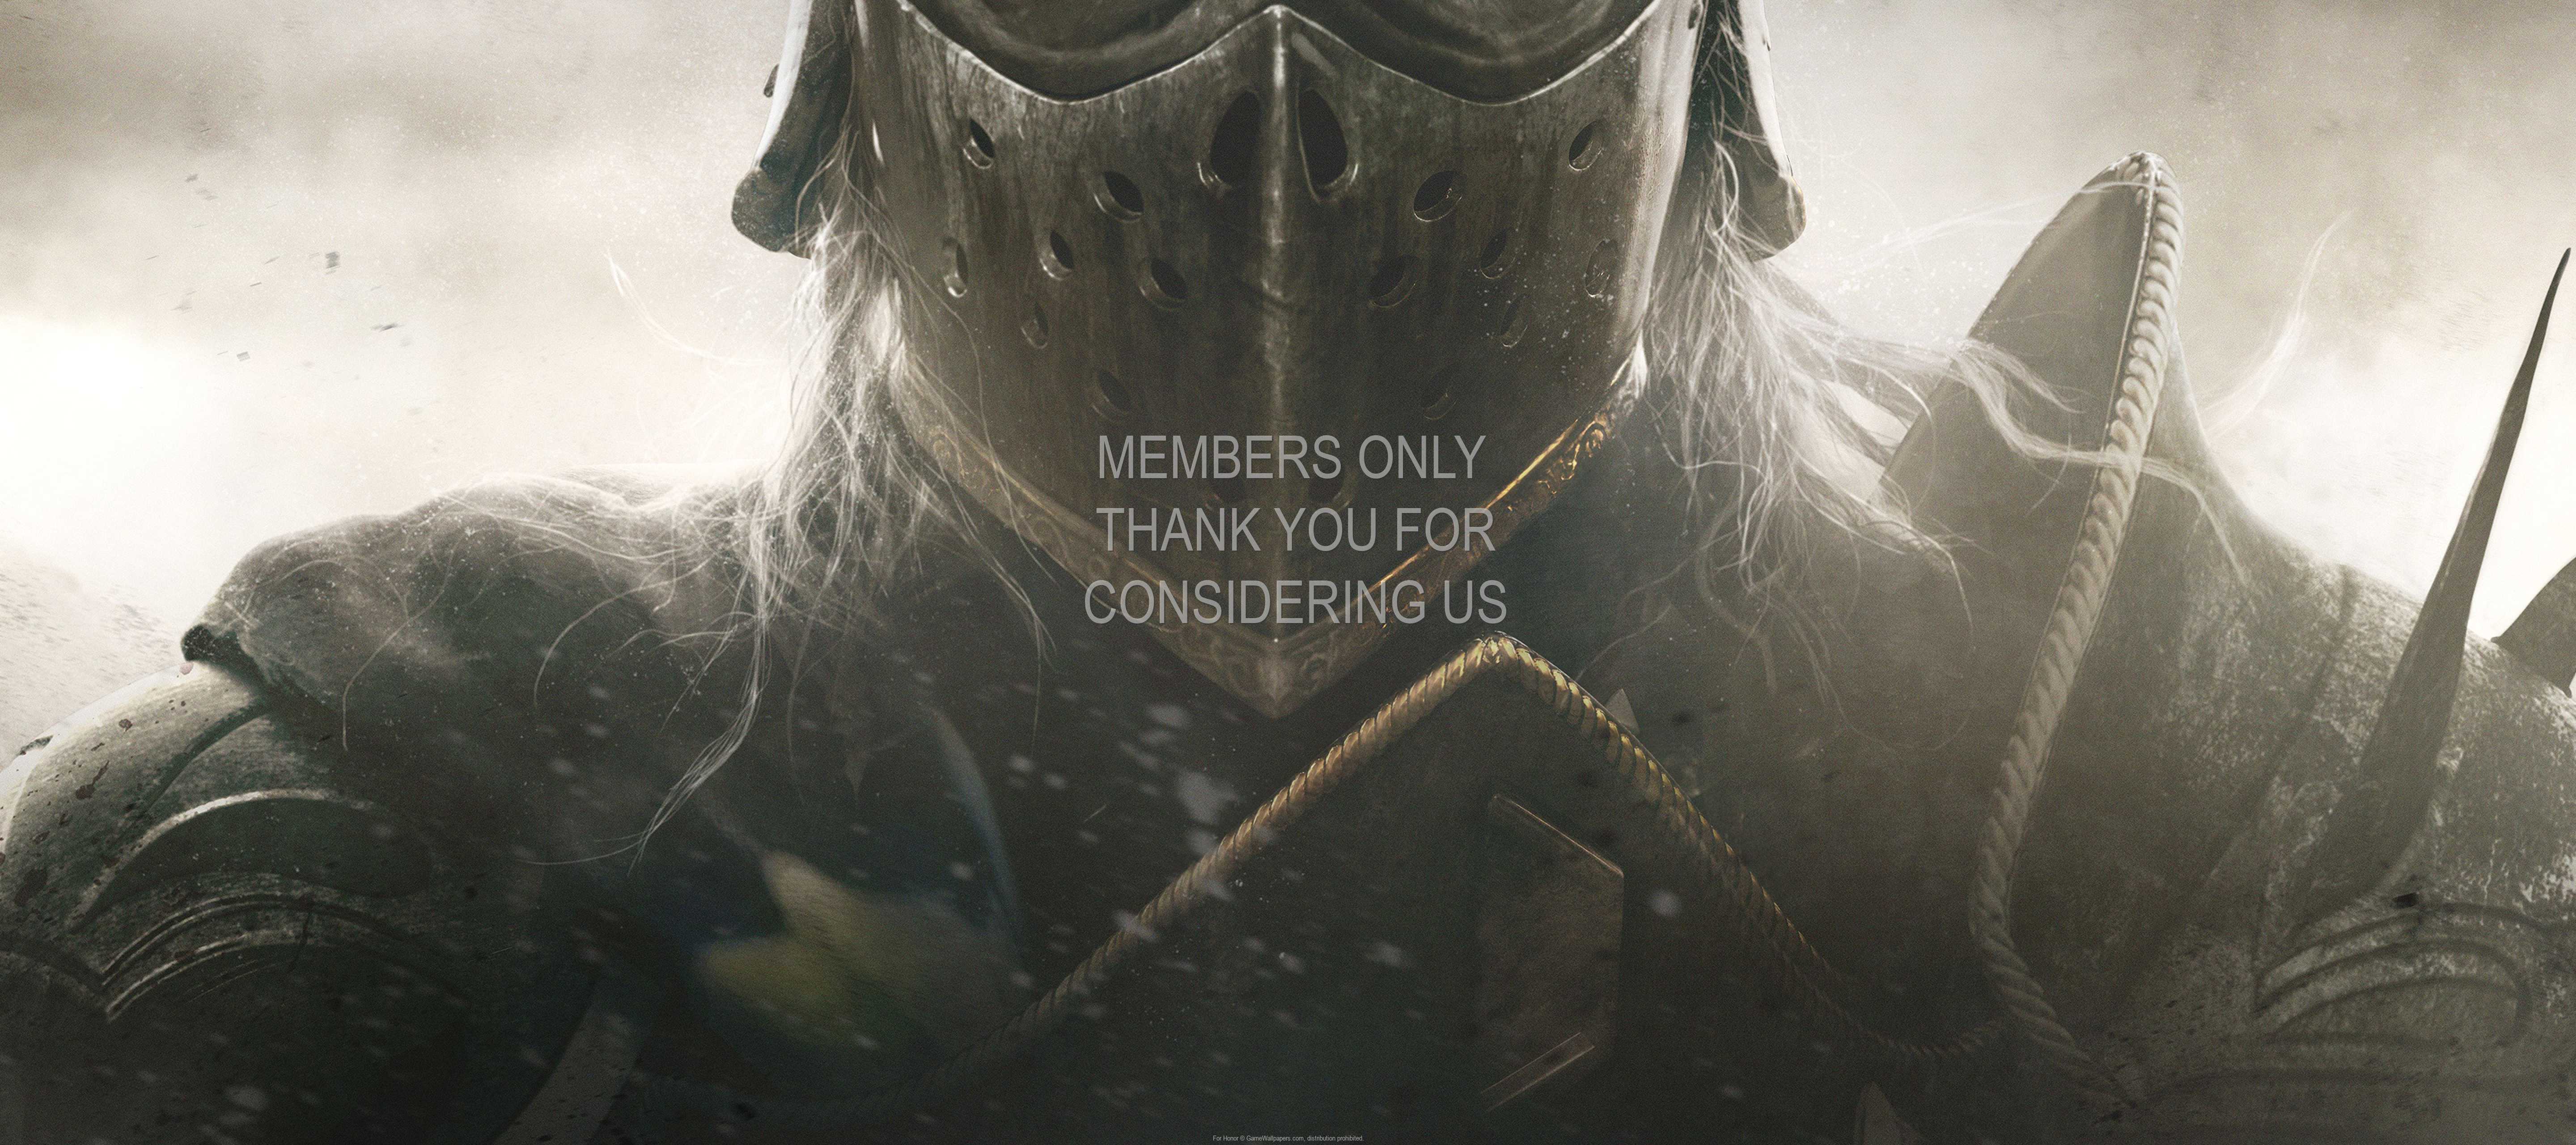 For Honor 1440p%20Horizontal Mobile wallpaper or background 06